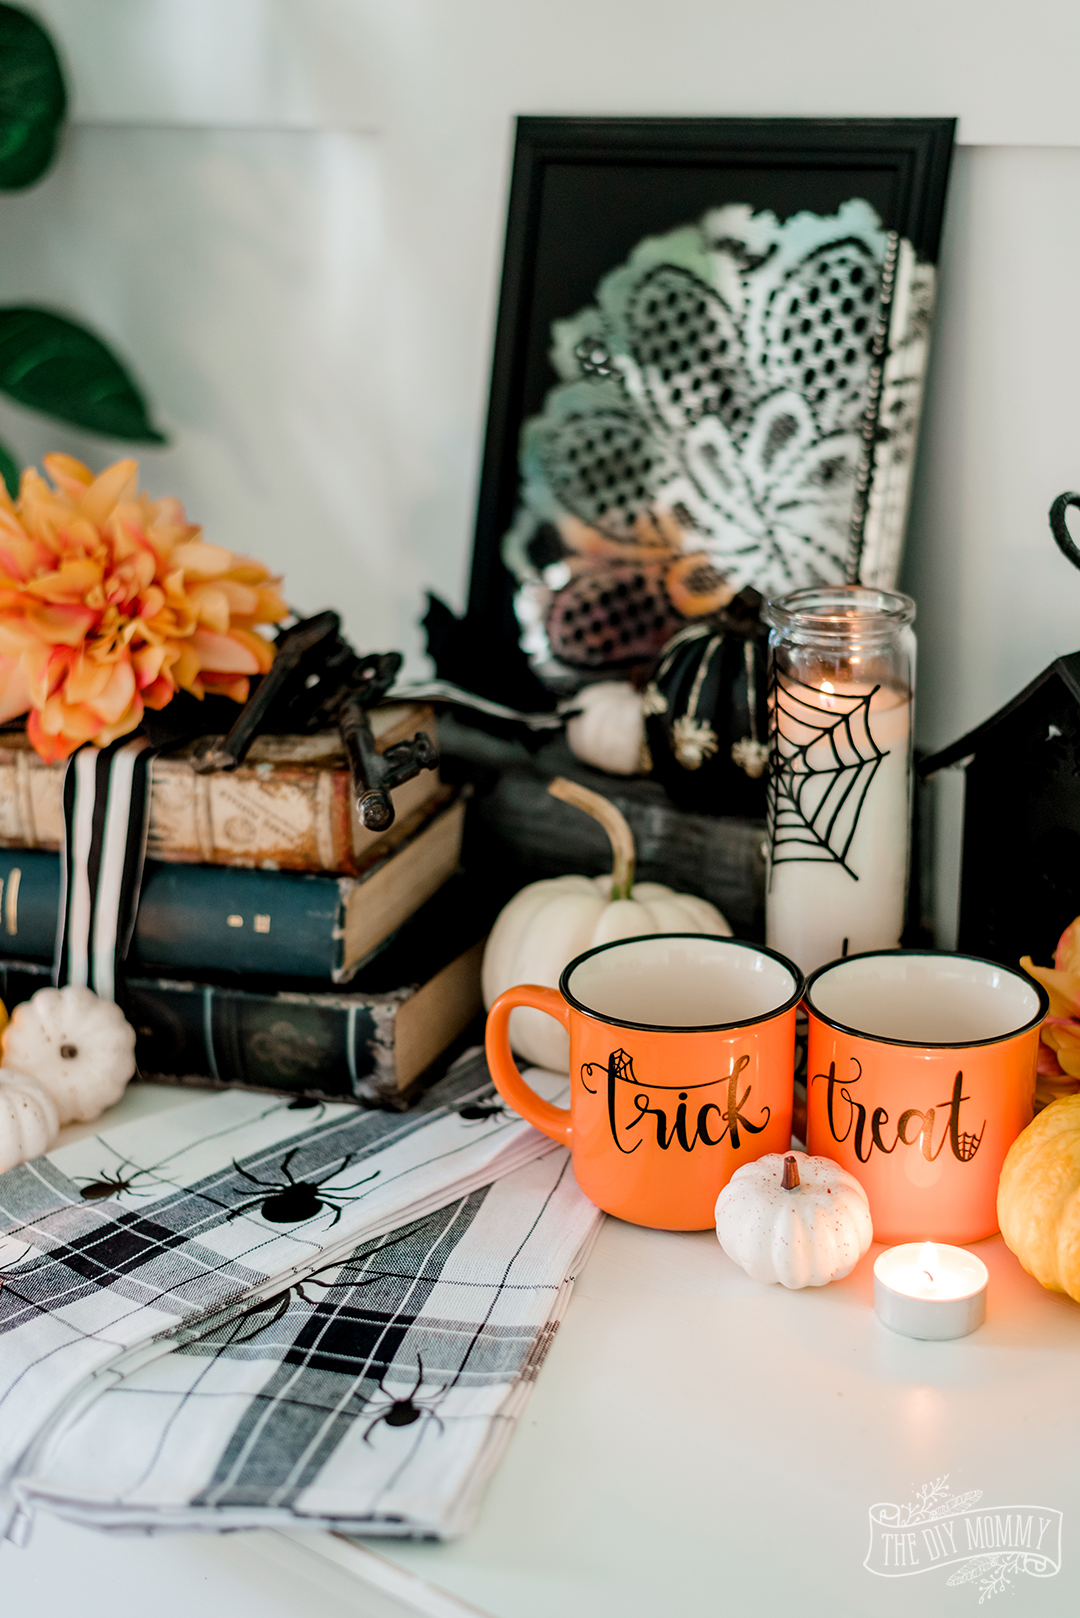 Indoor DIY Halloween decorations with Cricut and Dollar Store decor Ideas including orange cups, napkins and a spooky candle